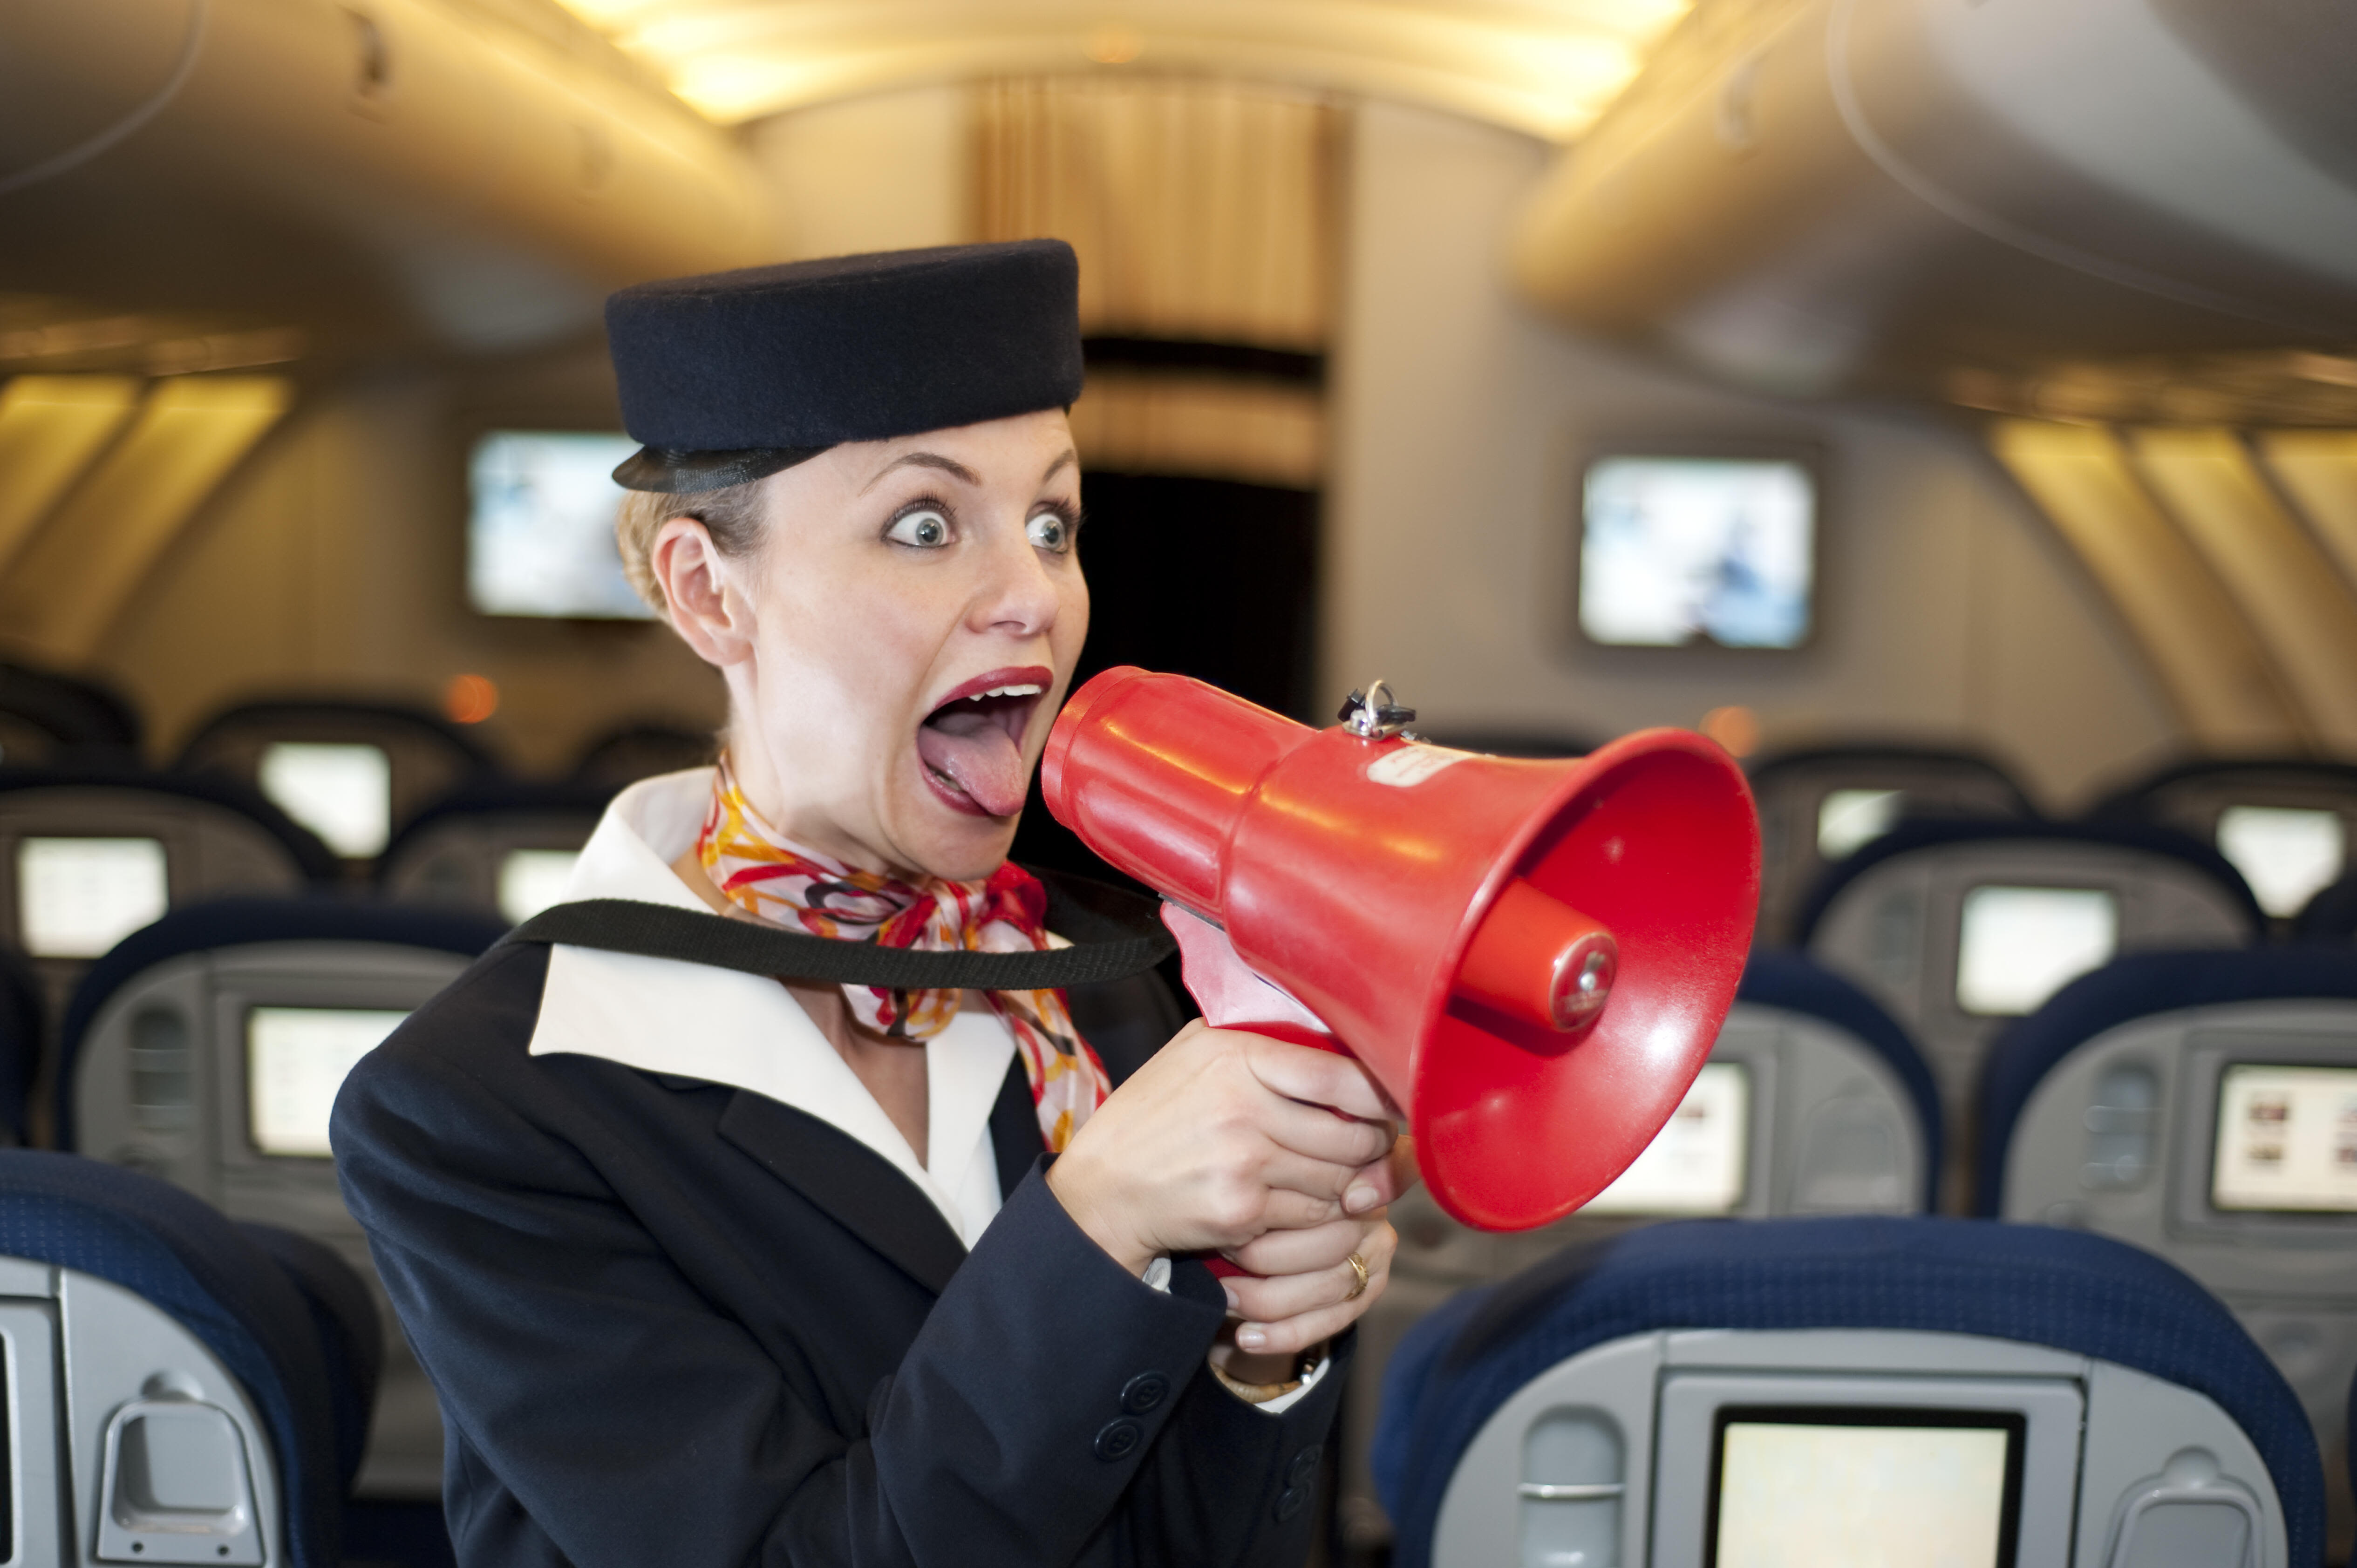 Flight Canceled After Flight Attendant Has Meltdown Over Simple Request | iHeart